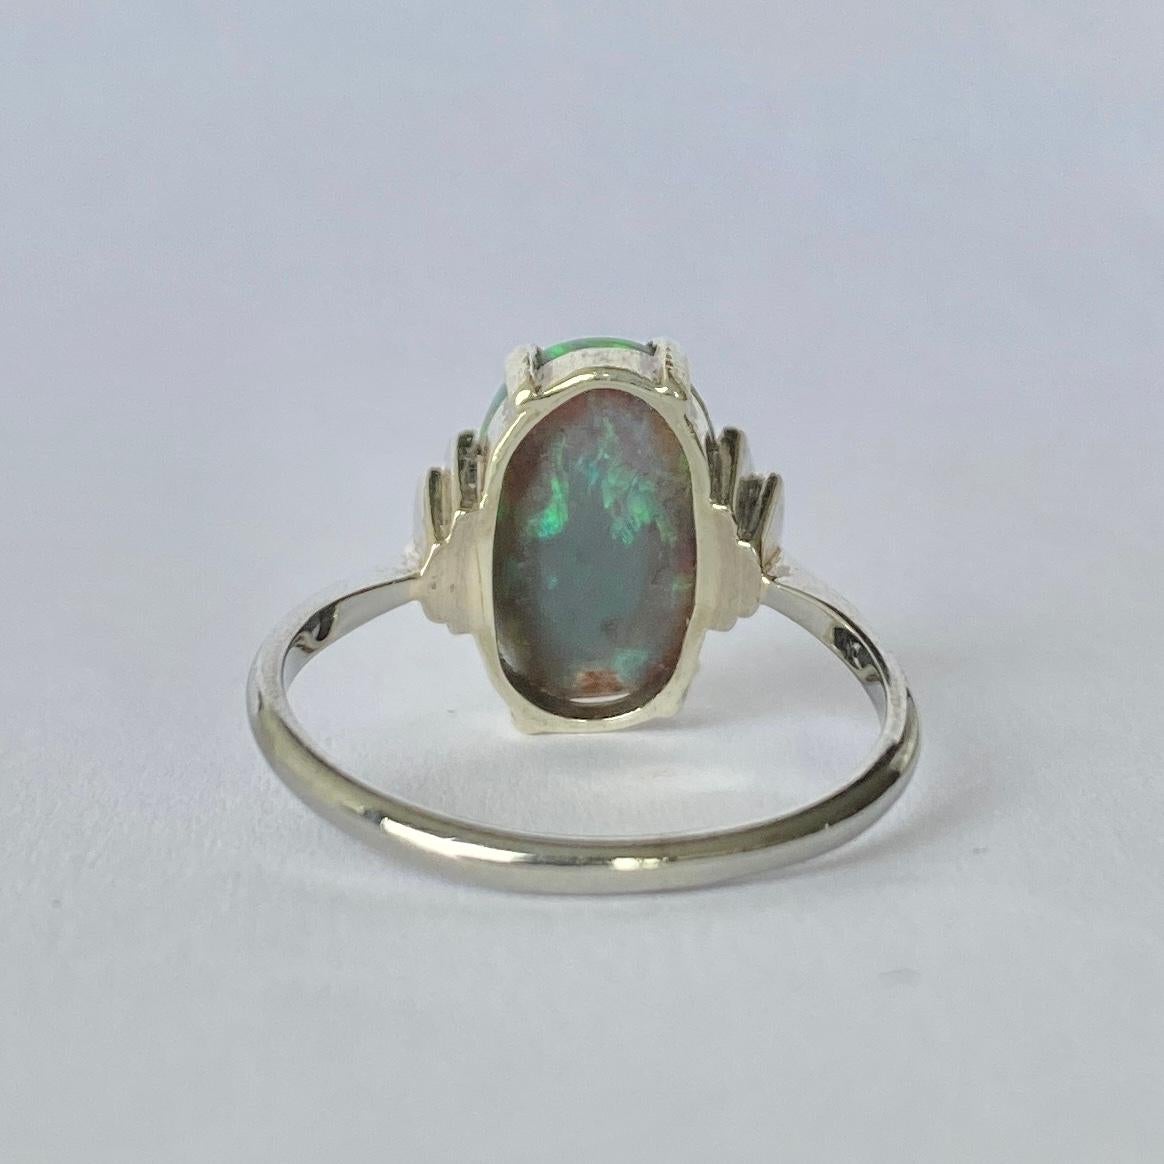 The colour of this 3 1/2carat black opal is exquisite! It is set between classic step shoulders. The rest of the ring is modelled in 18ct white gold. 

Ring Size: N /2 or 7
Stone Dimensions: 13x9mm
Height Off Finger: 5mm

Weight: 3g